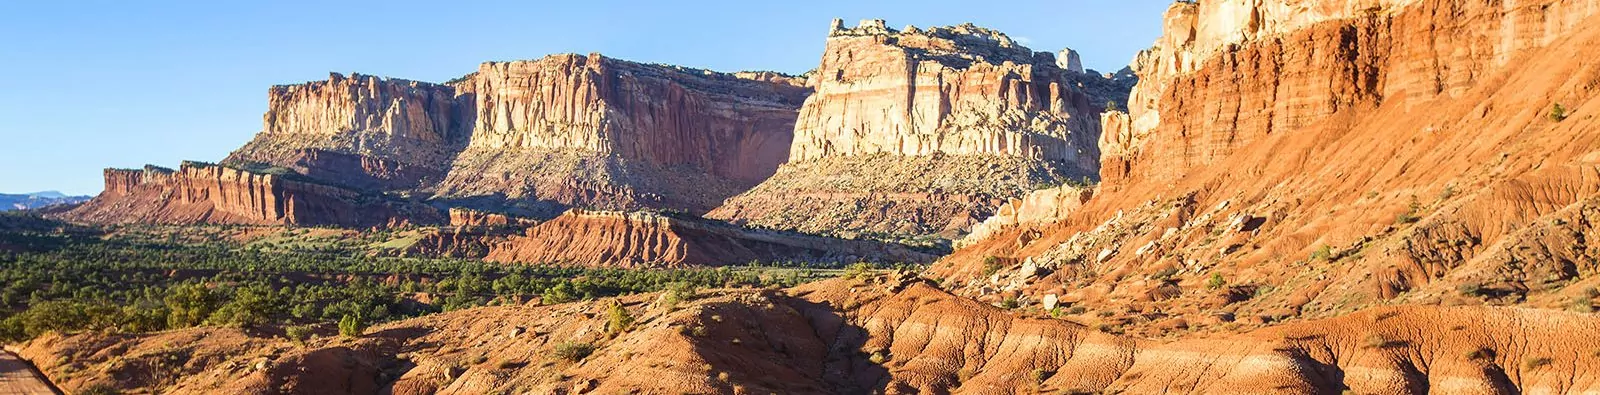 Sun shining on the cliffs and canyons of Capitol Reef National Park